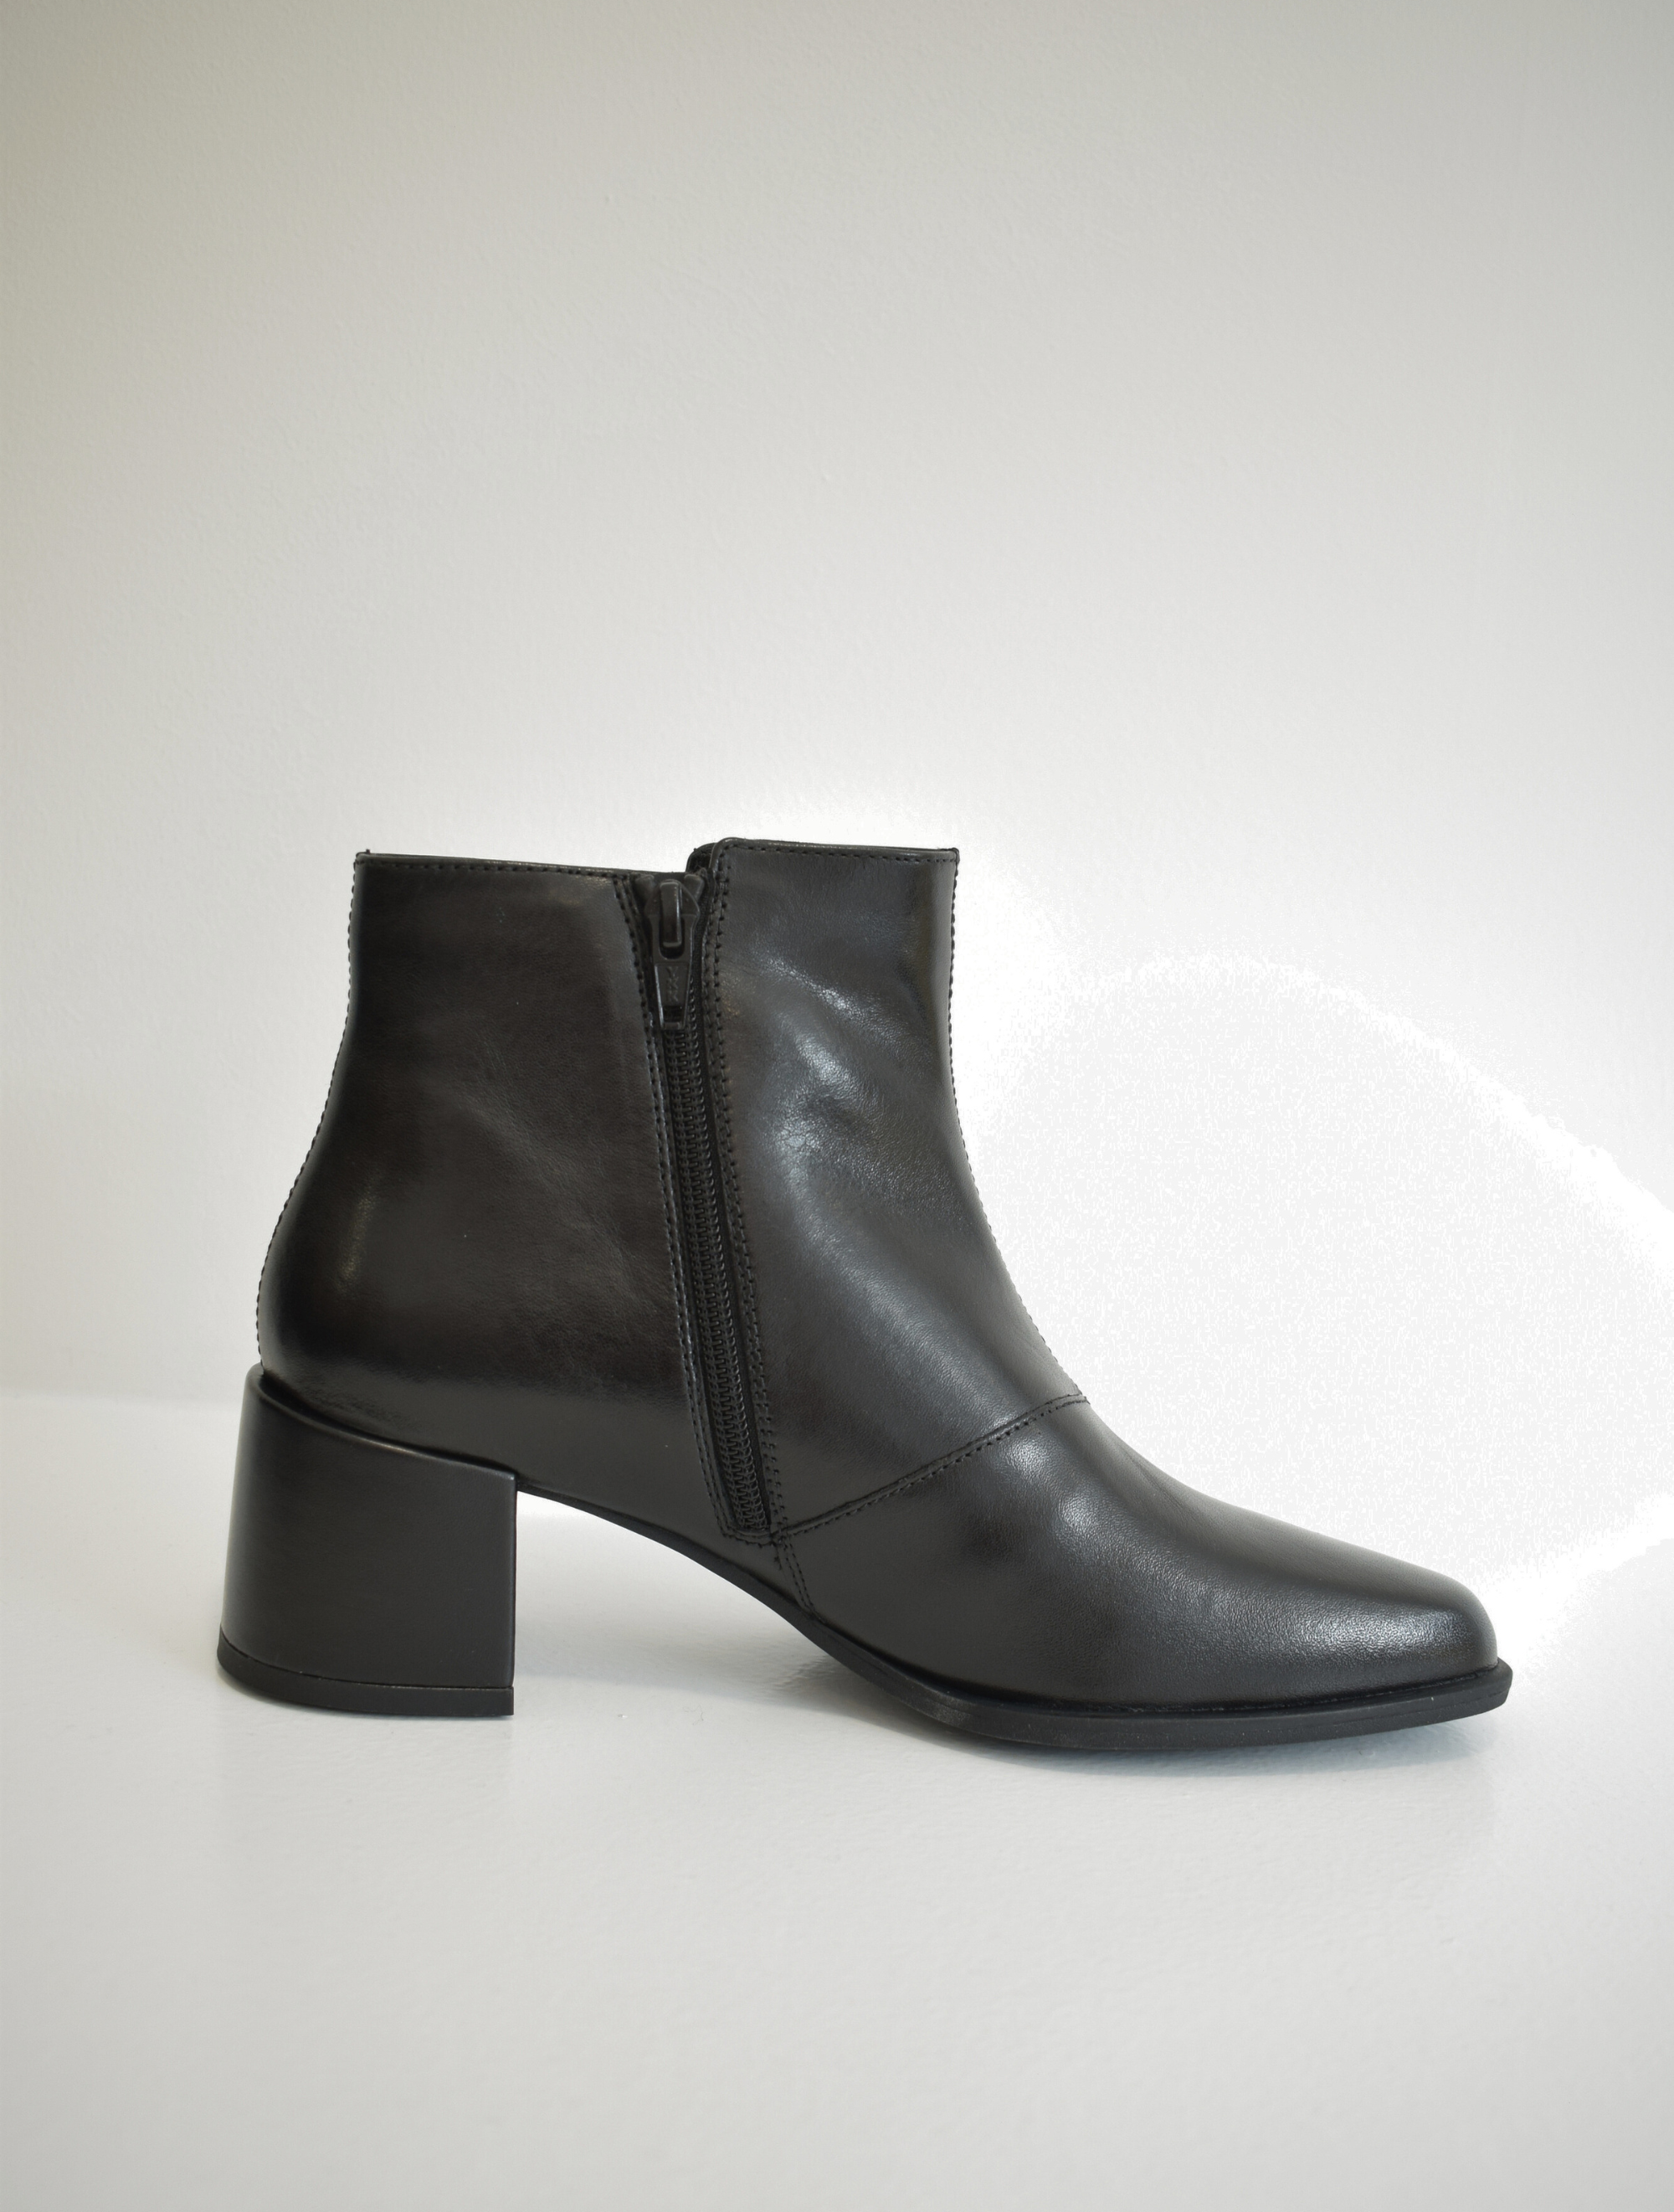 Black ankle boot with leather wrapped block heel and zip fastening